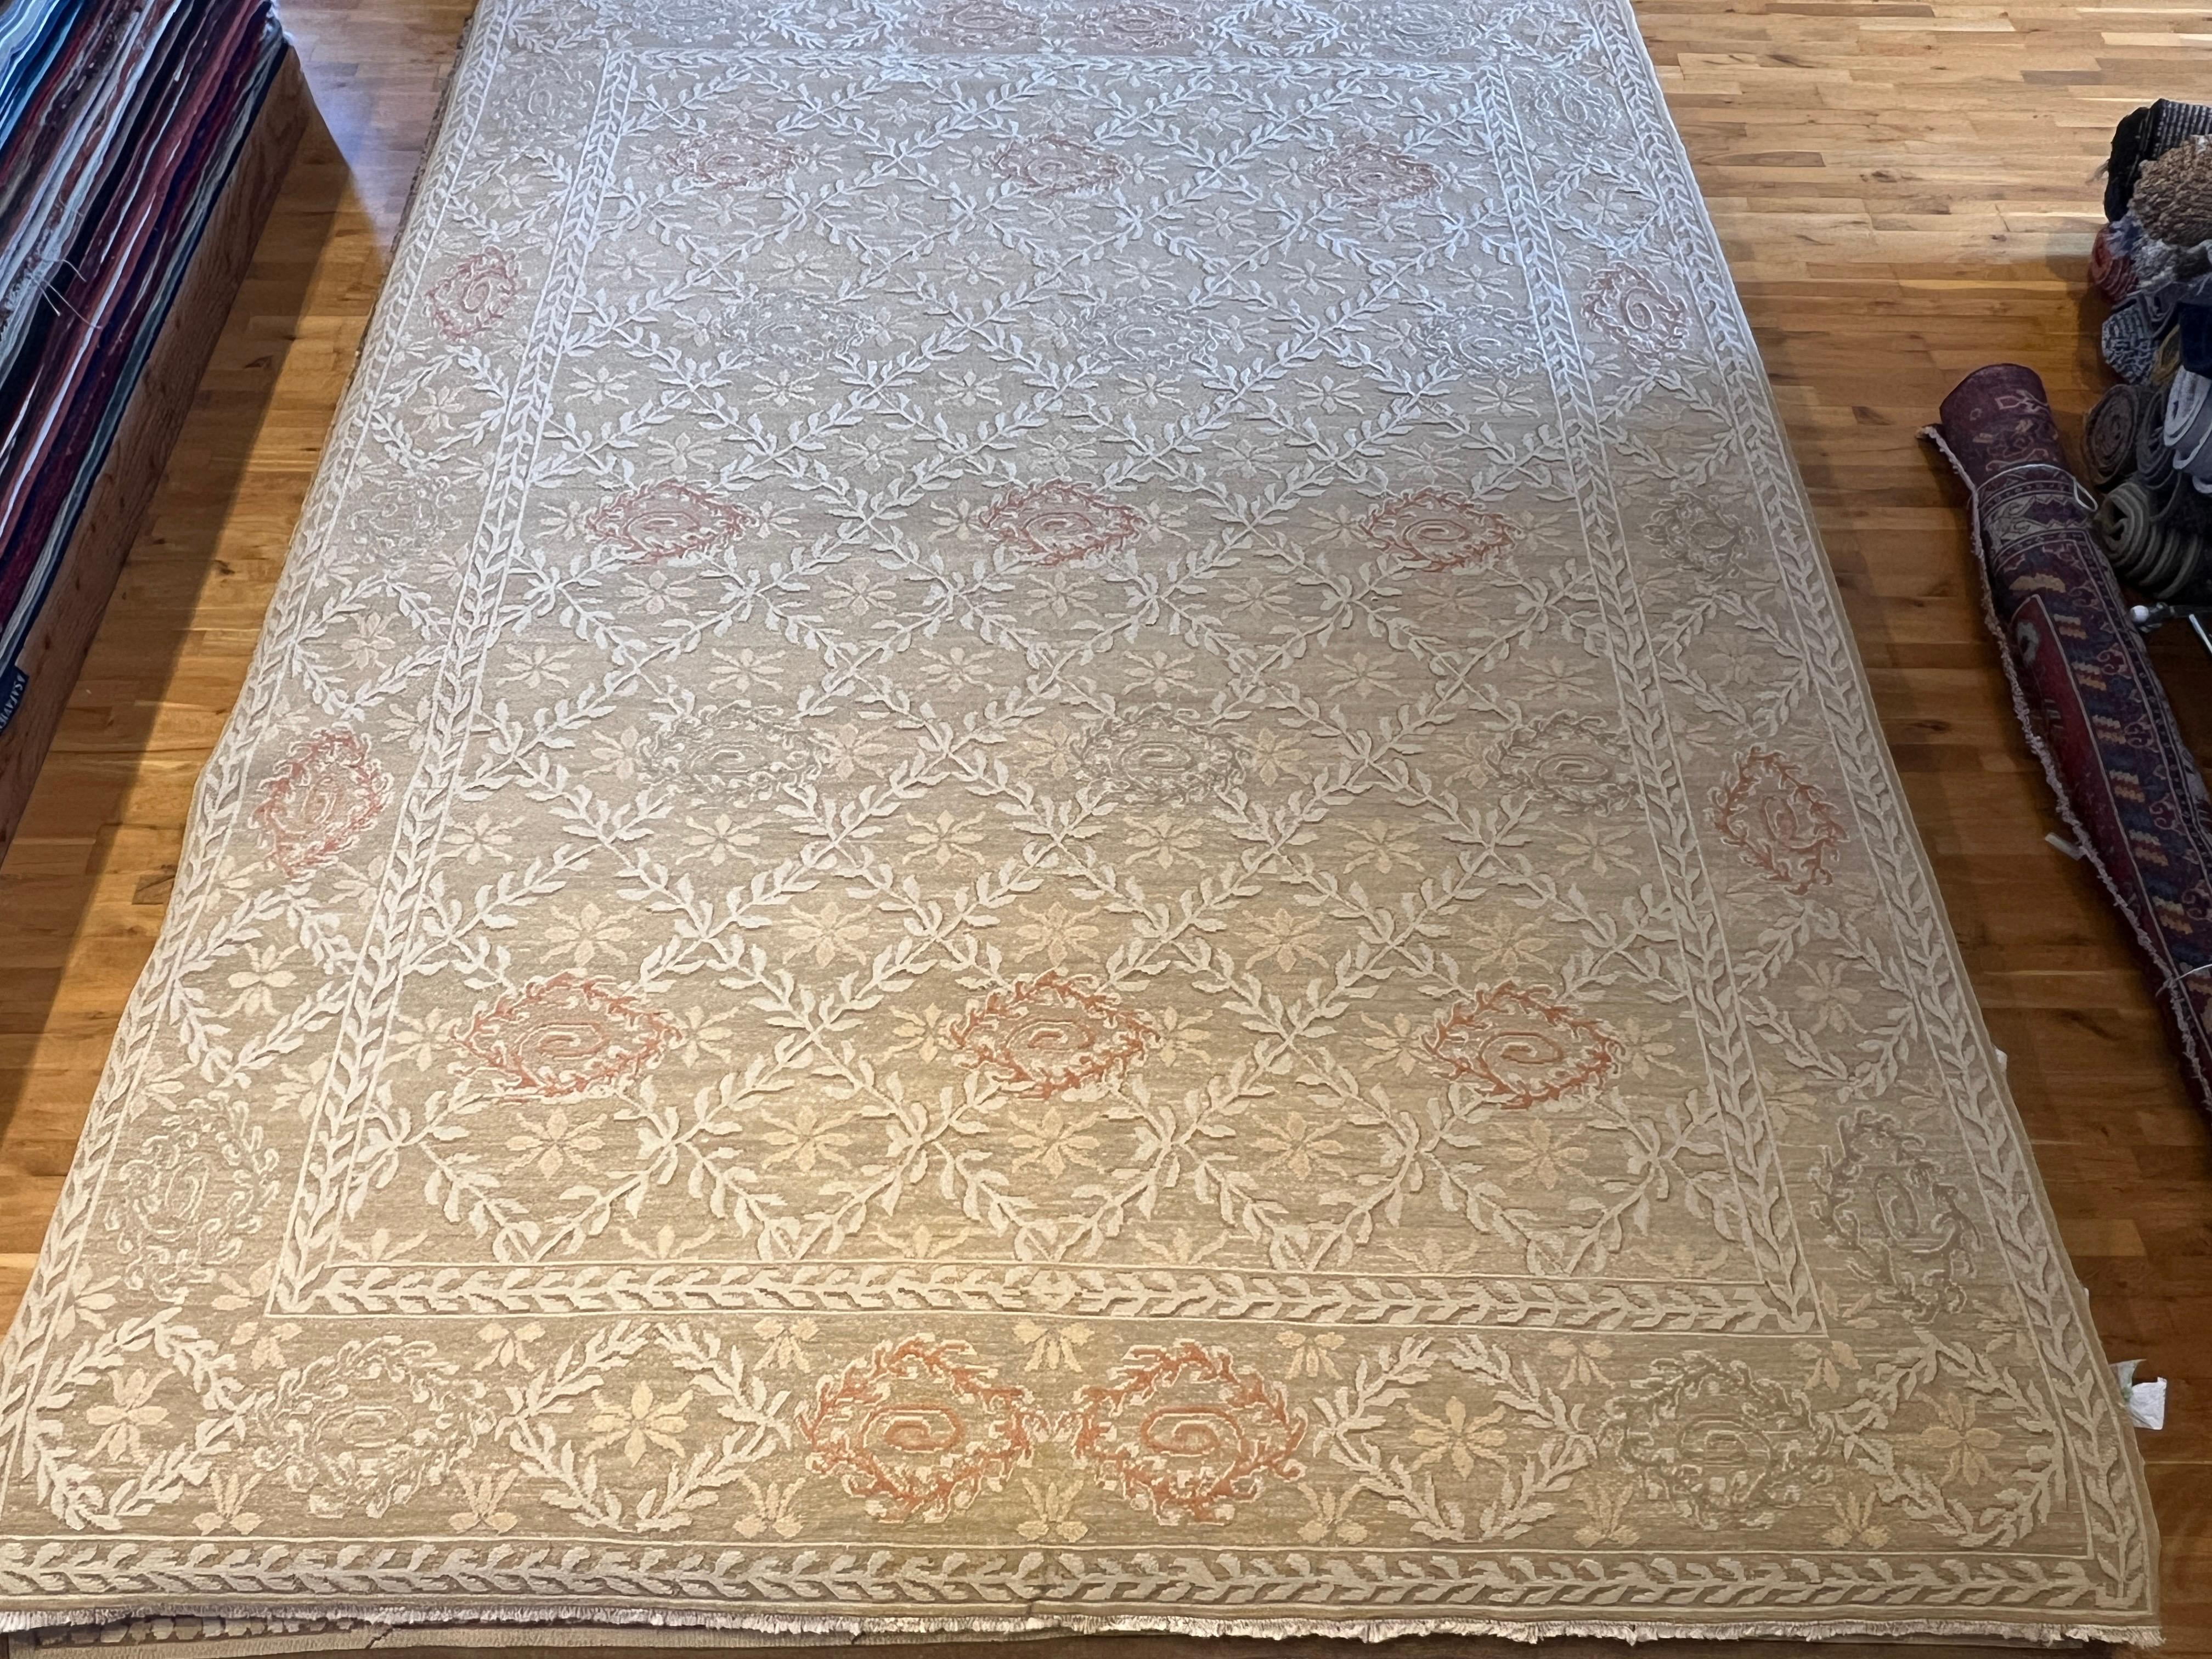 Romanian 9'x12' French Floral Inspired Hand-Knotted Wool Rug For Sale